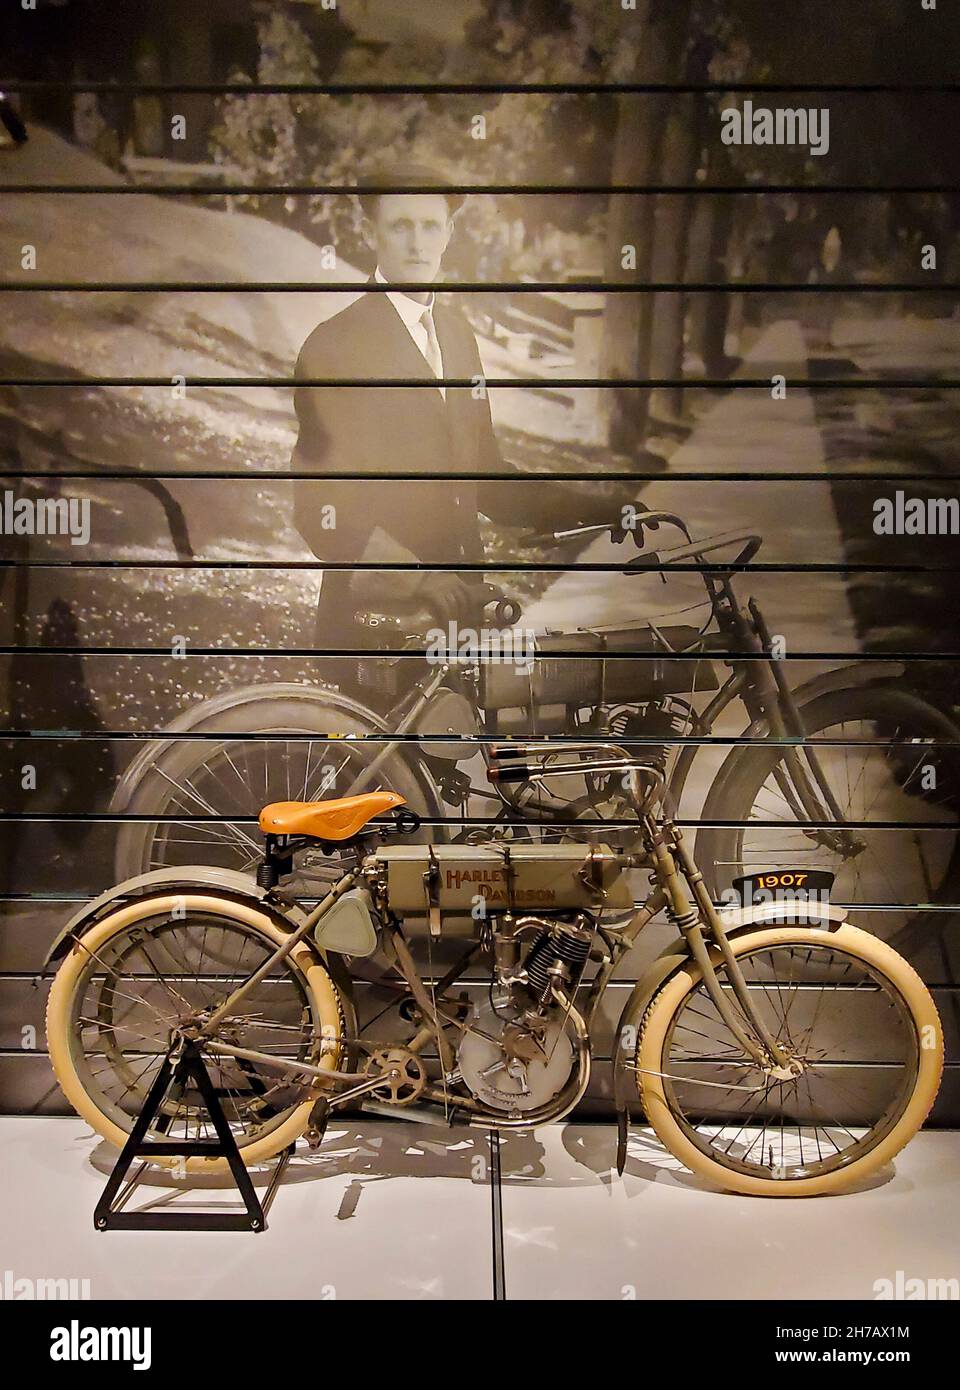 One of the first motorized bikes built by the Harley-Davidson company. In 1903 four men formed the Harley-Davidson Motor Company, which they operated out of a small shed in the Davidson family's backyard. Harley's name was given top billing because he was credited with coming up with the original idea for a motorcycle. This is their model from 1907, on display in the Harley-Davidson Museum in Milwaukee, WI. Stock Photo